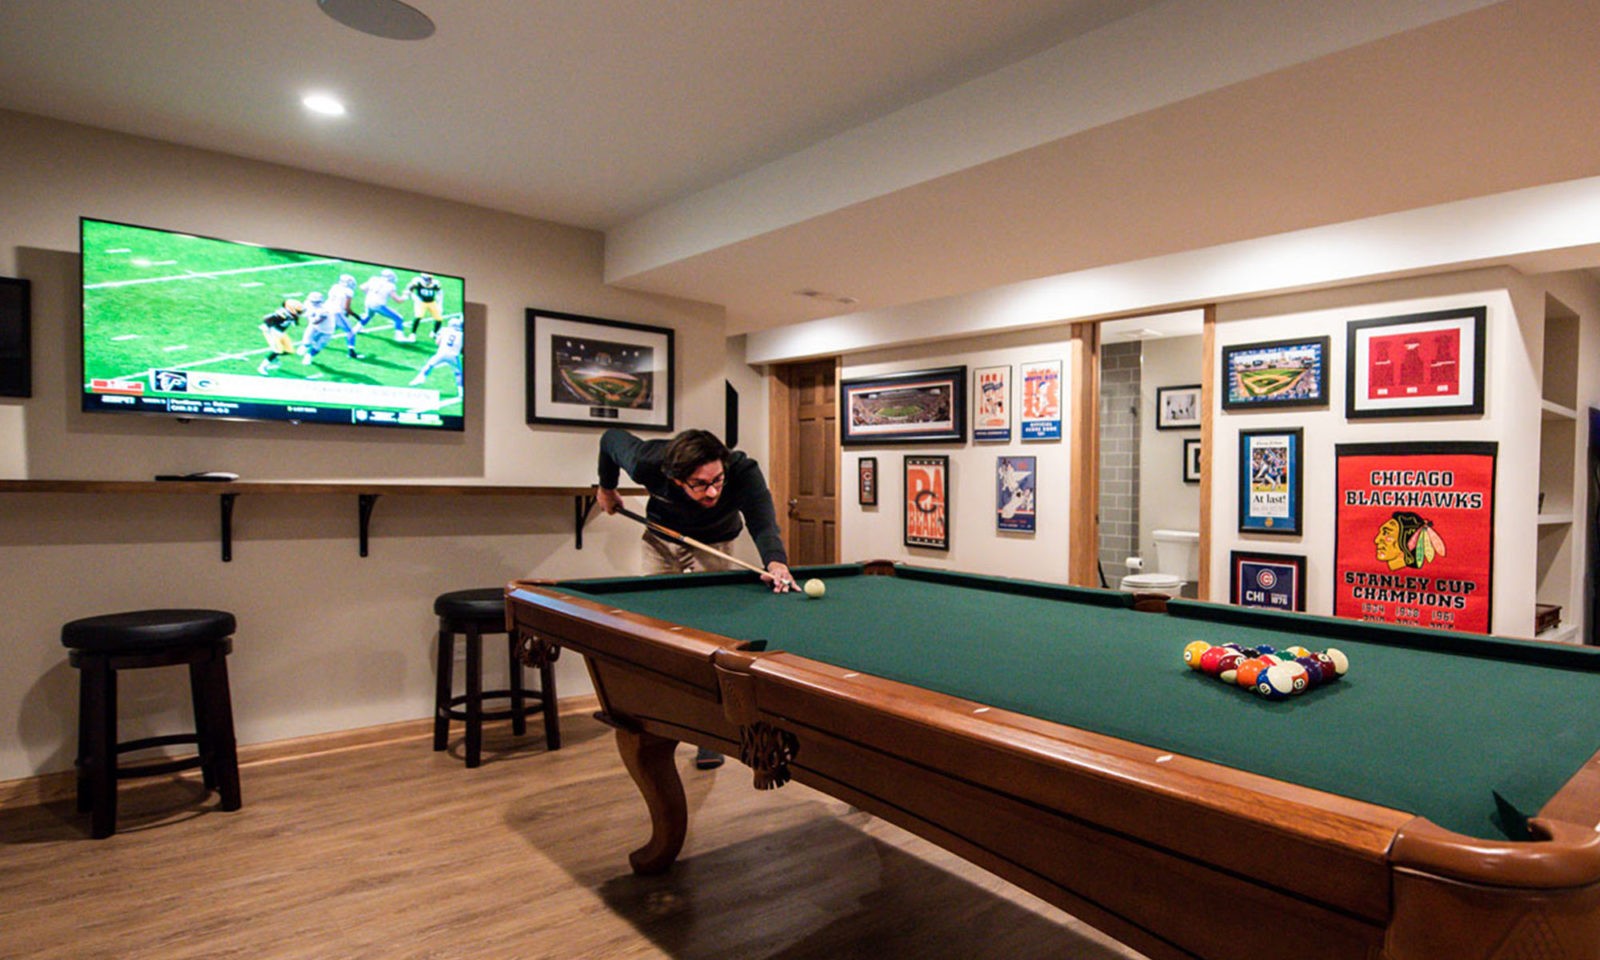 view of basement remodel game and pool table area with man playing pool